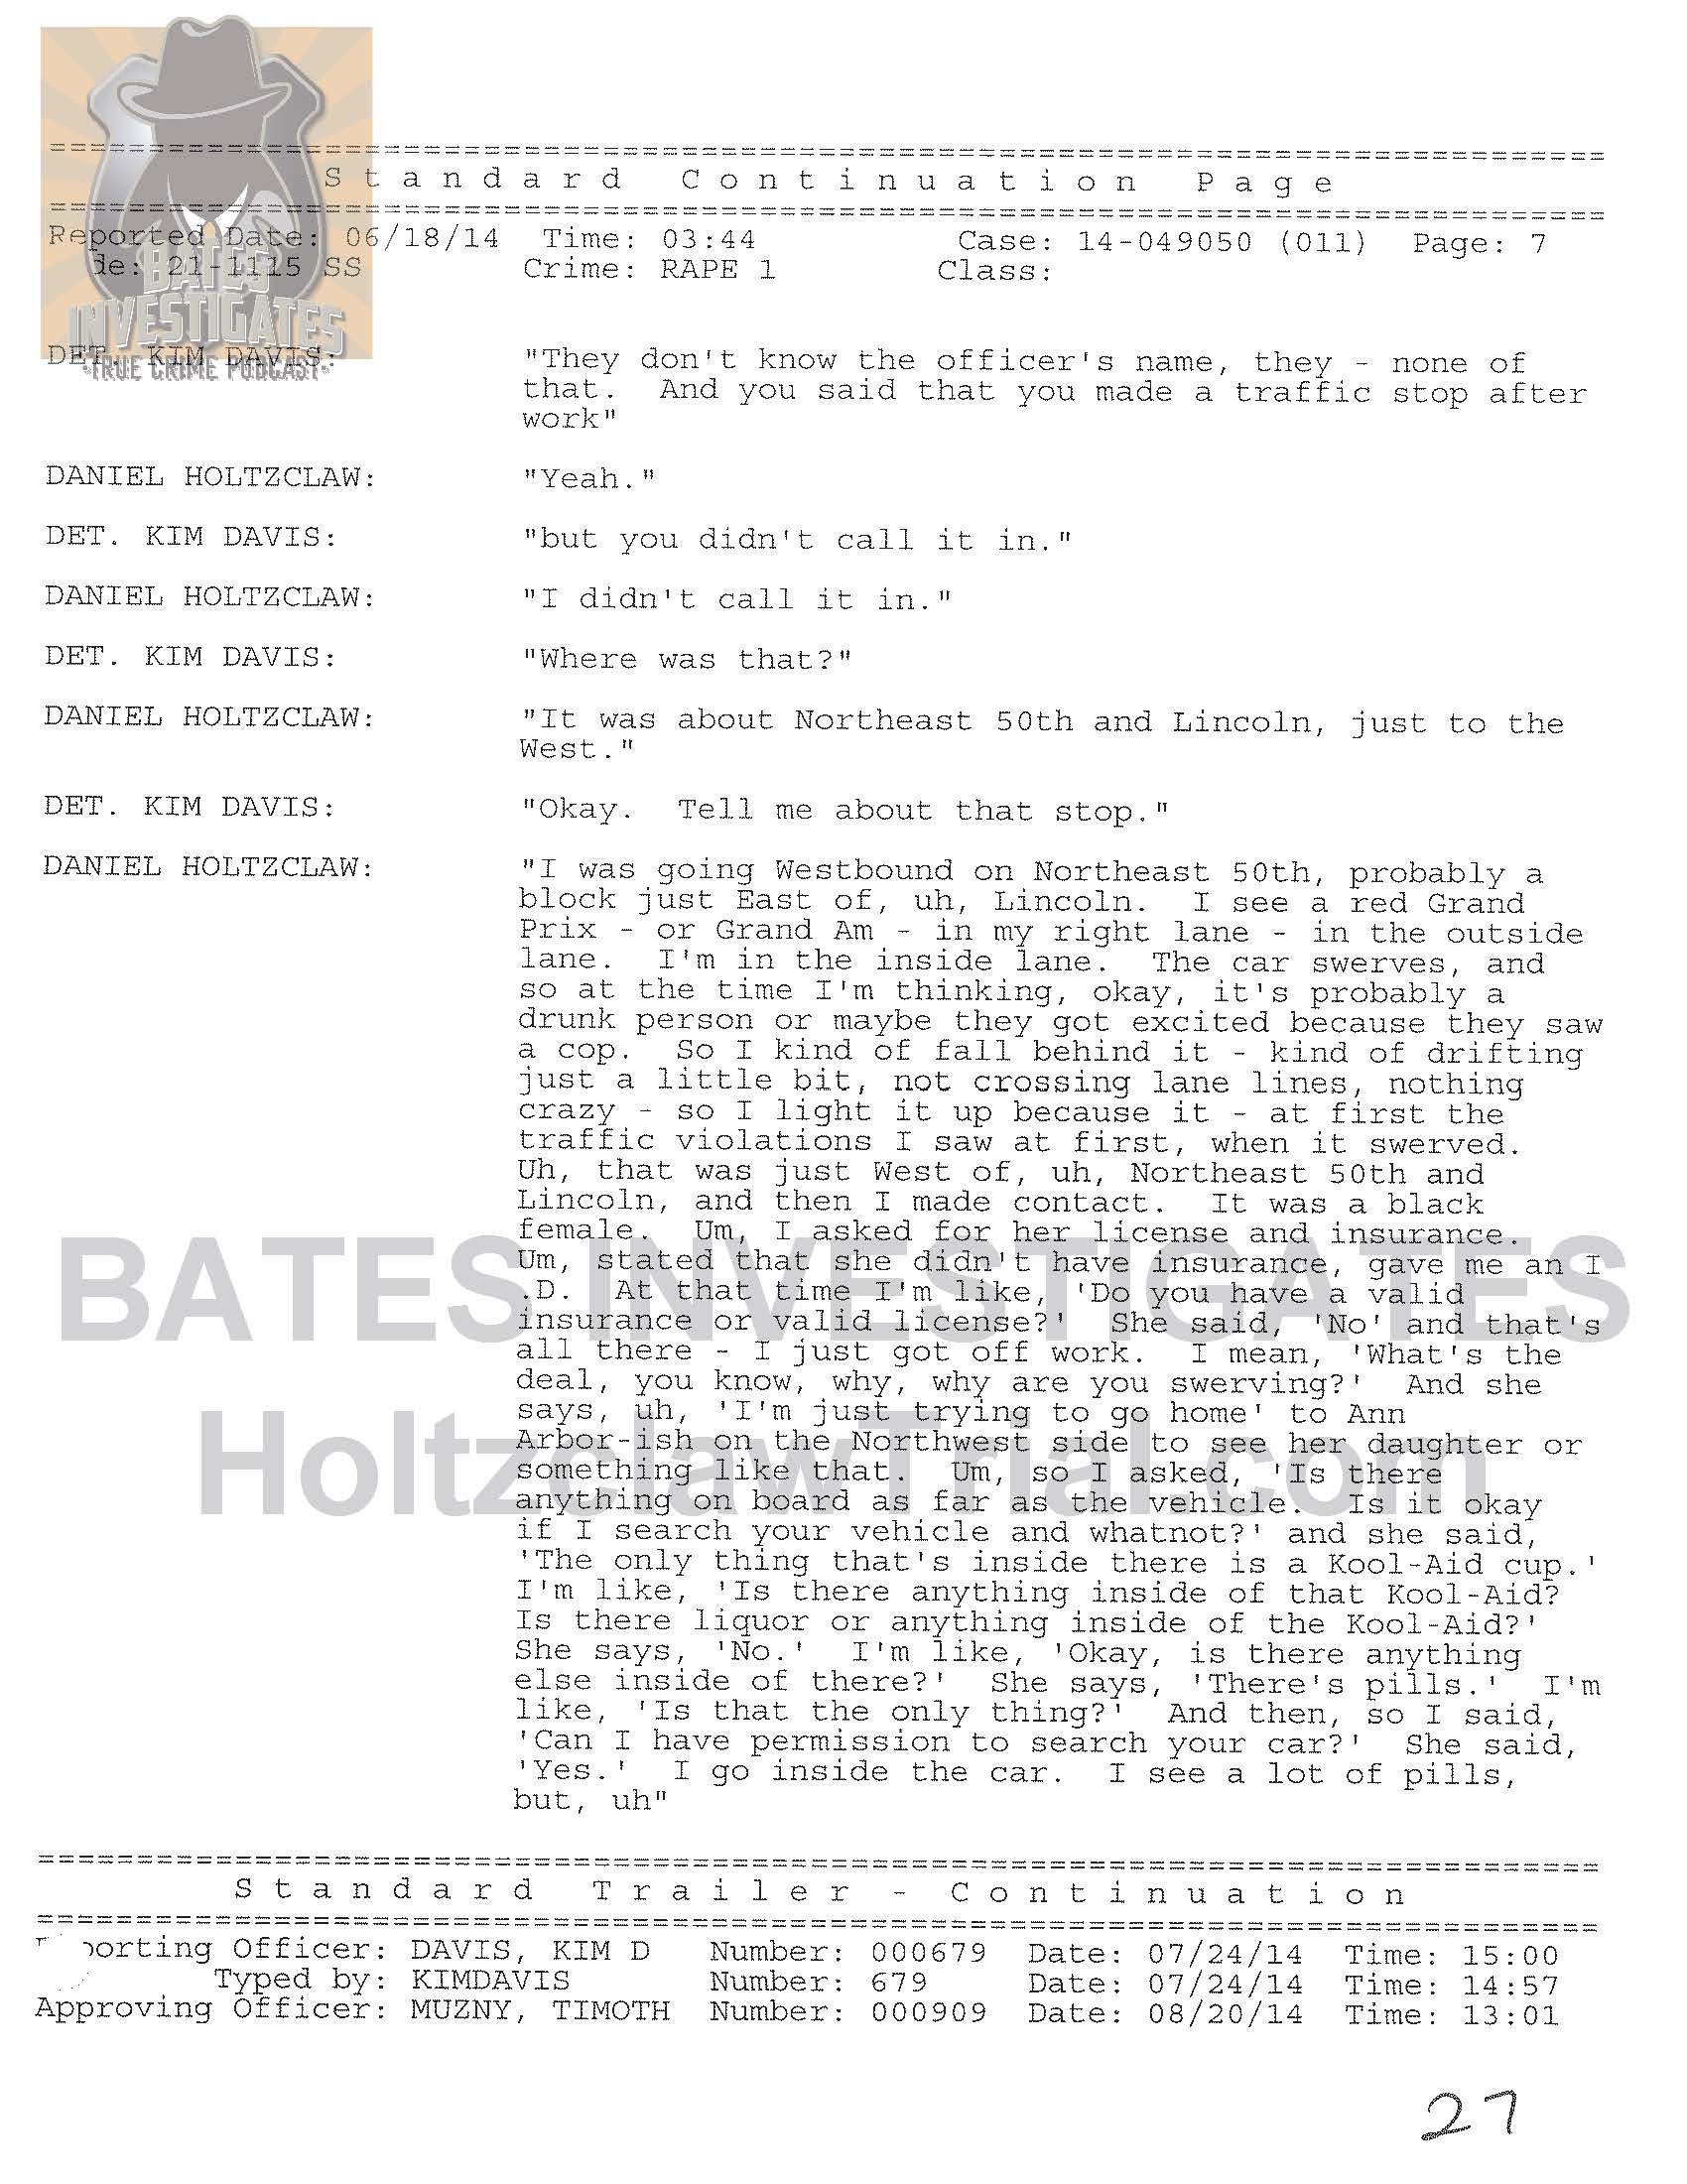 Holtzclaw Interrogation Transcript - Ep02 Redacted_Page_07.jpg